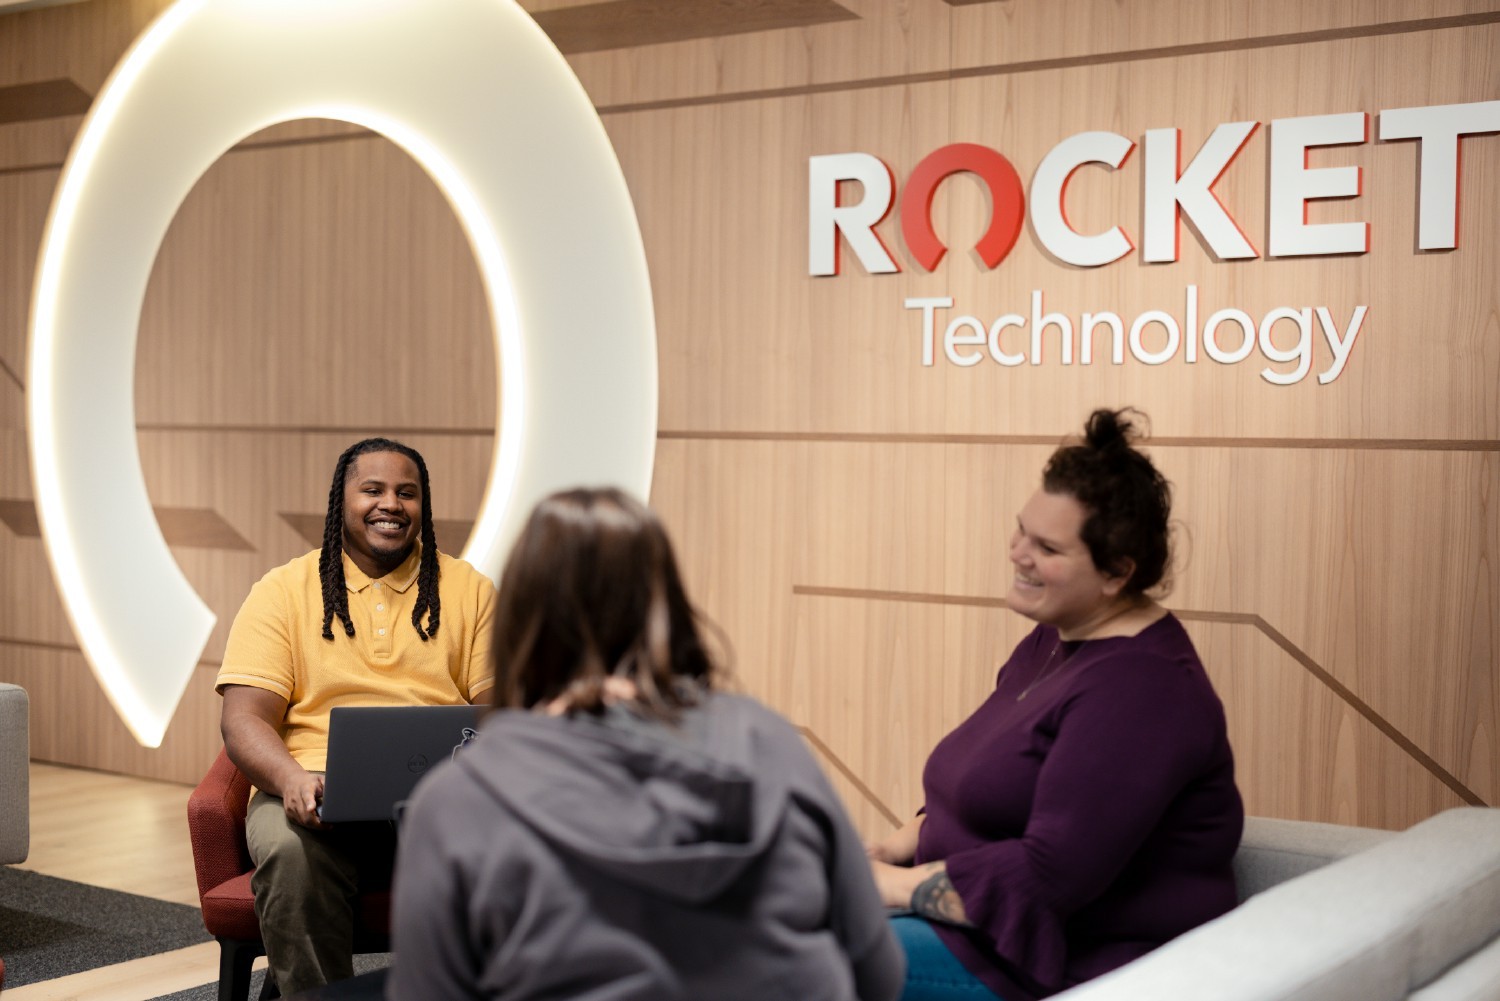 Team members participate in a lively discussion in a recently-renovated Rocket Technologies space.